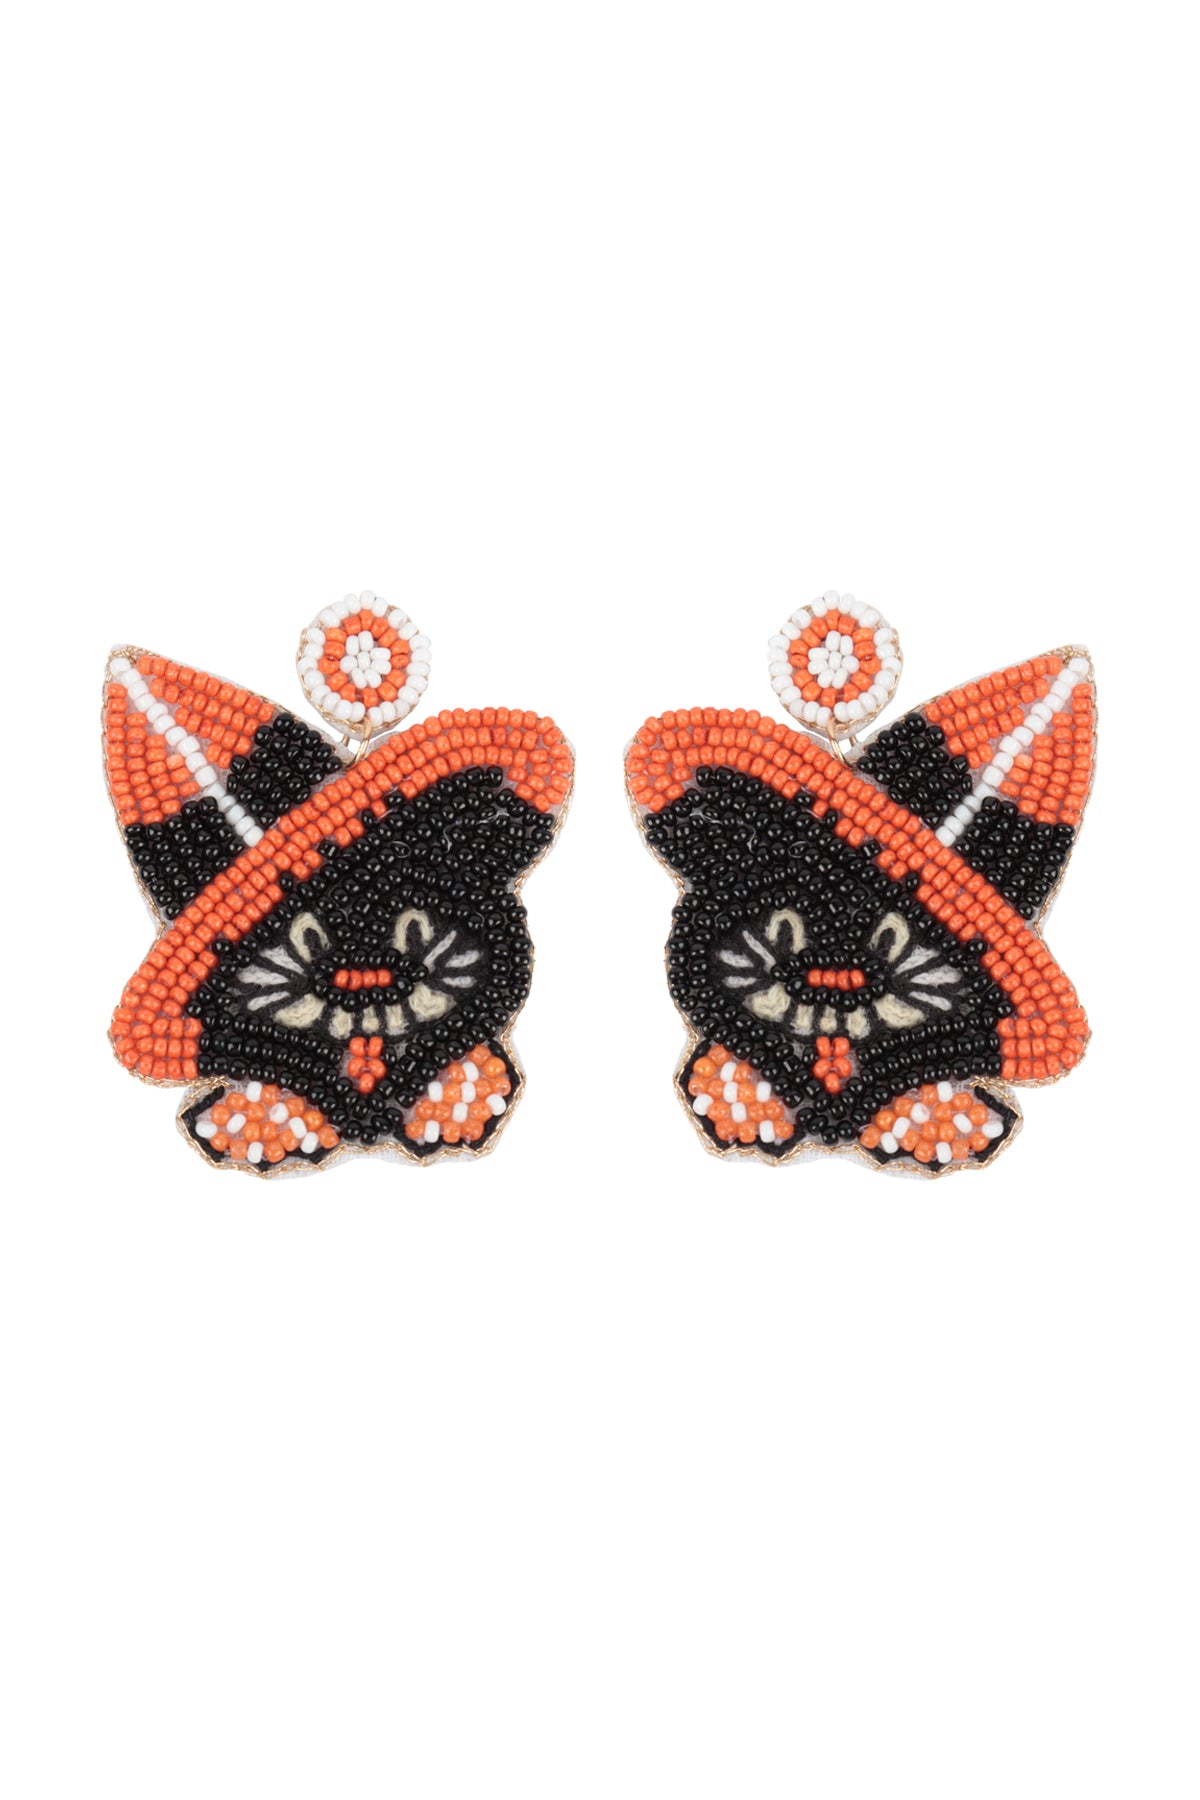 HALLOWEEN BLACK CAT WITH HAT SEED BEADS DROP EARRINGS-MULTICOLOR